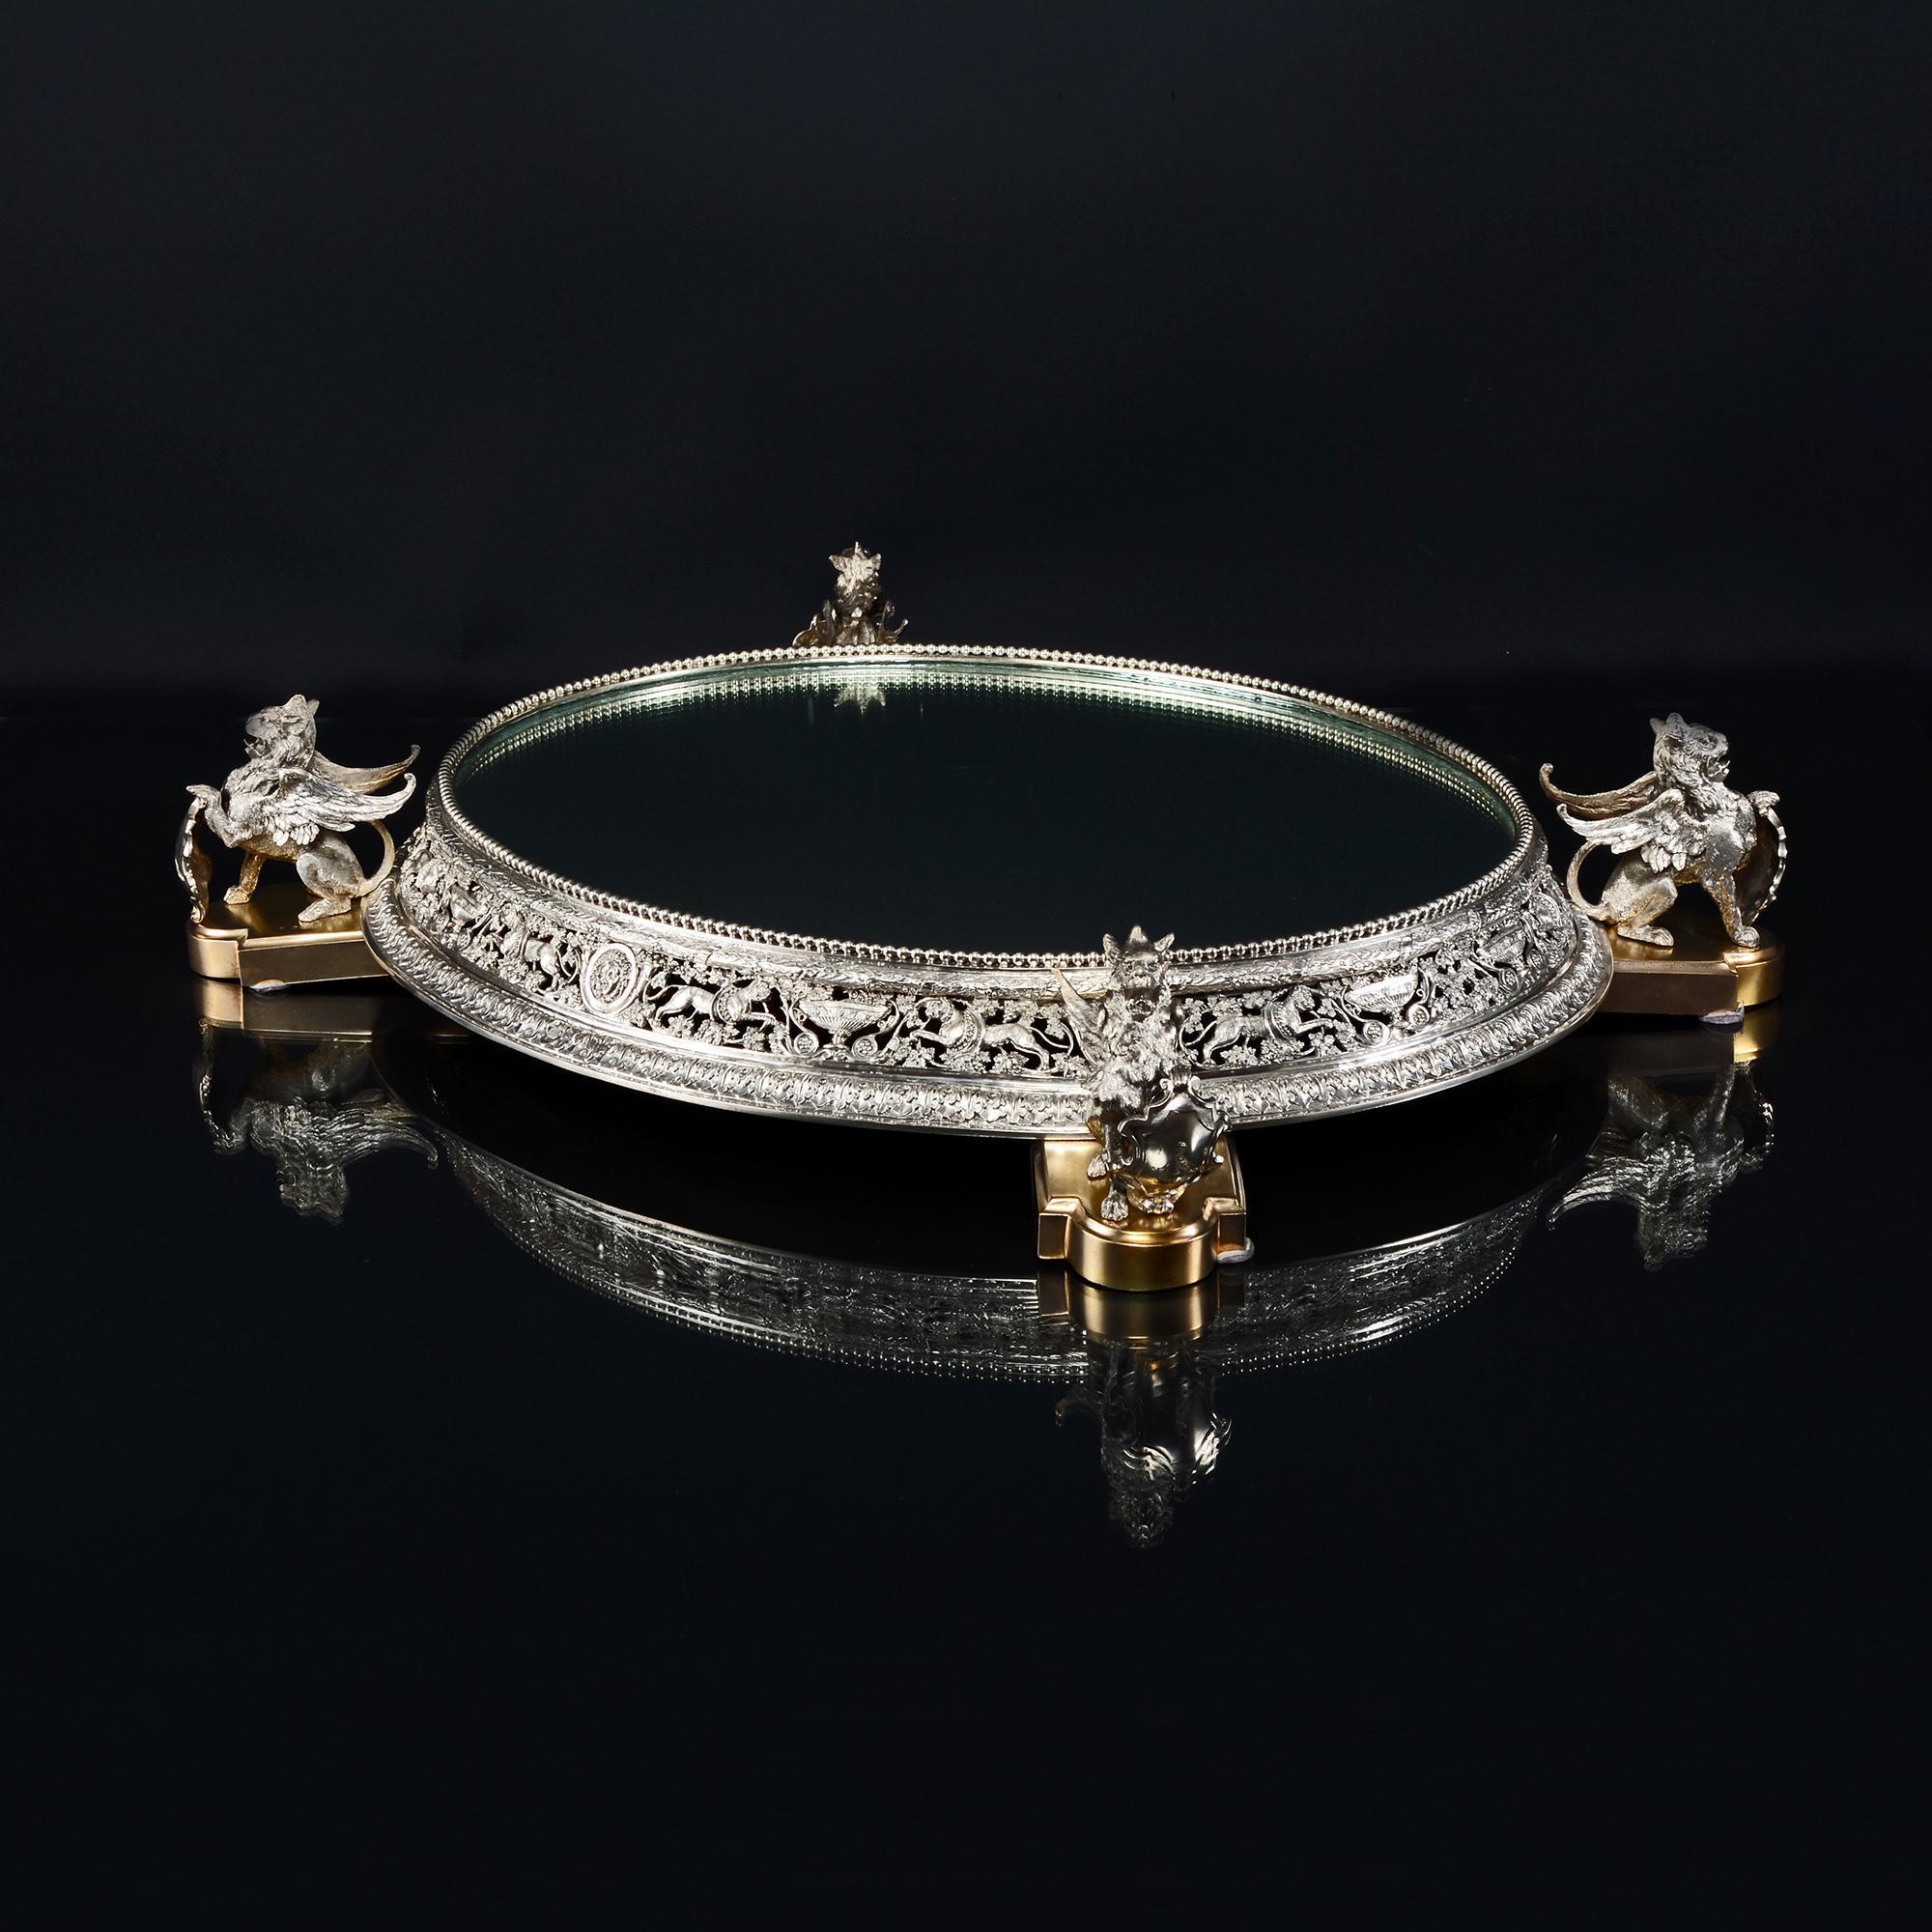 This beautiful silver plateau, oval in form, has finely cast and hand-chased classical scenes running round the border, incorporating lions entwined with grape vines and Bacchanalian masks. The central section is pierced openwork allowing the dark